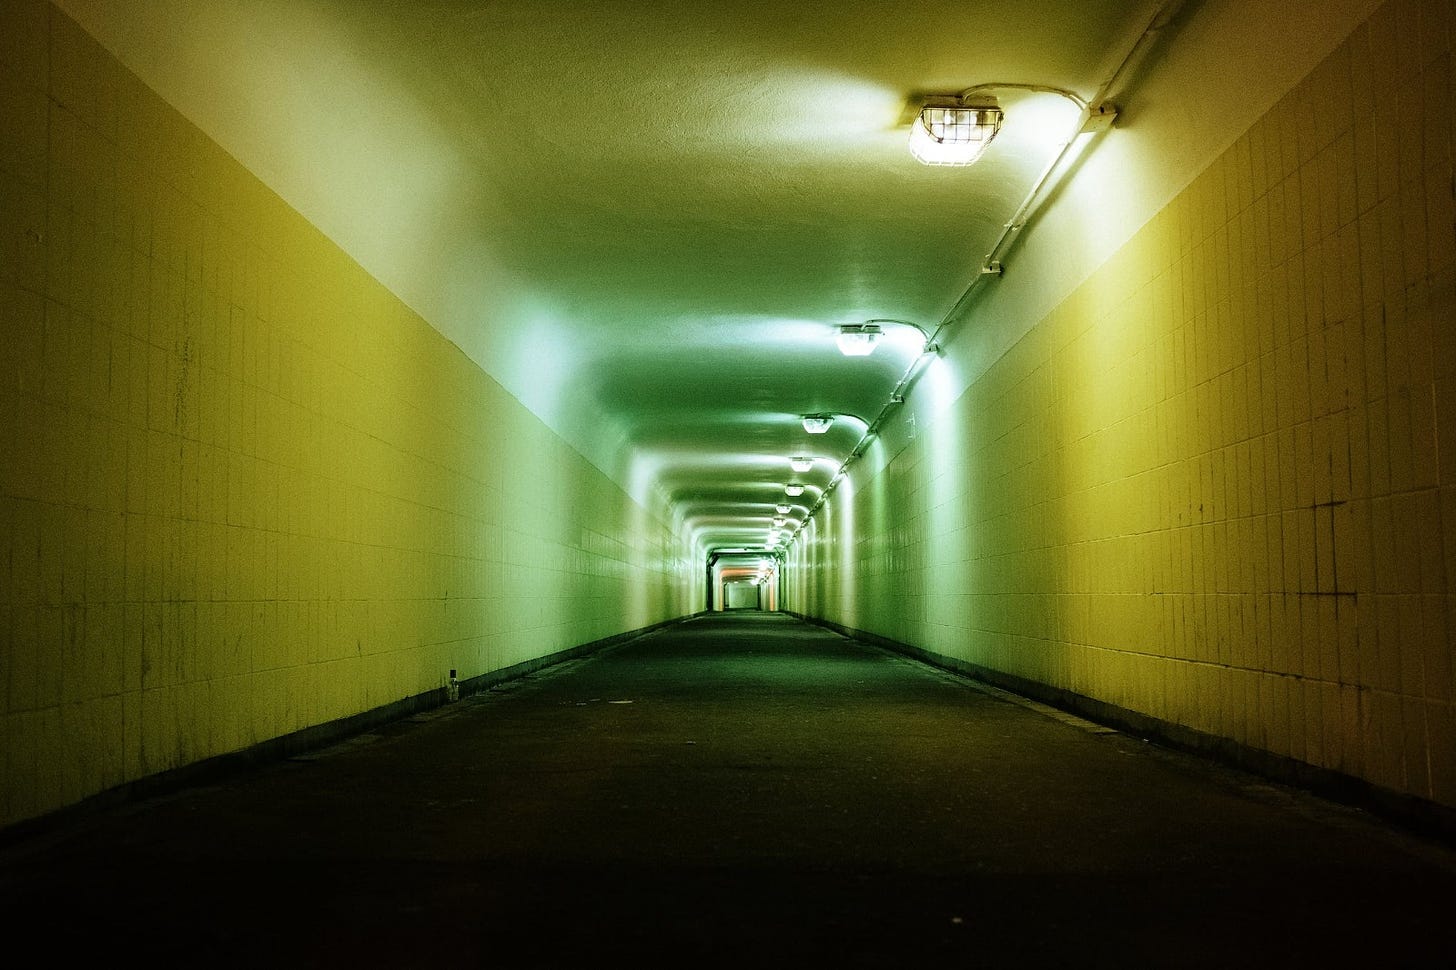 A long hallway or underpass, lit by flourescent lighting. it's the sort of place you wouldn't want to walk down alone. The tiles are white, the grouting is dirty, and there is an eerie glow to the place.